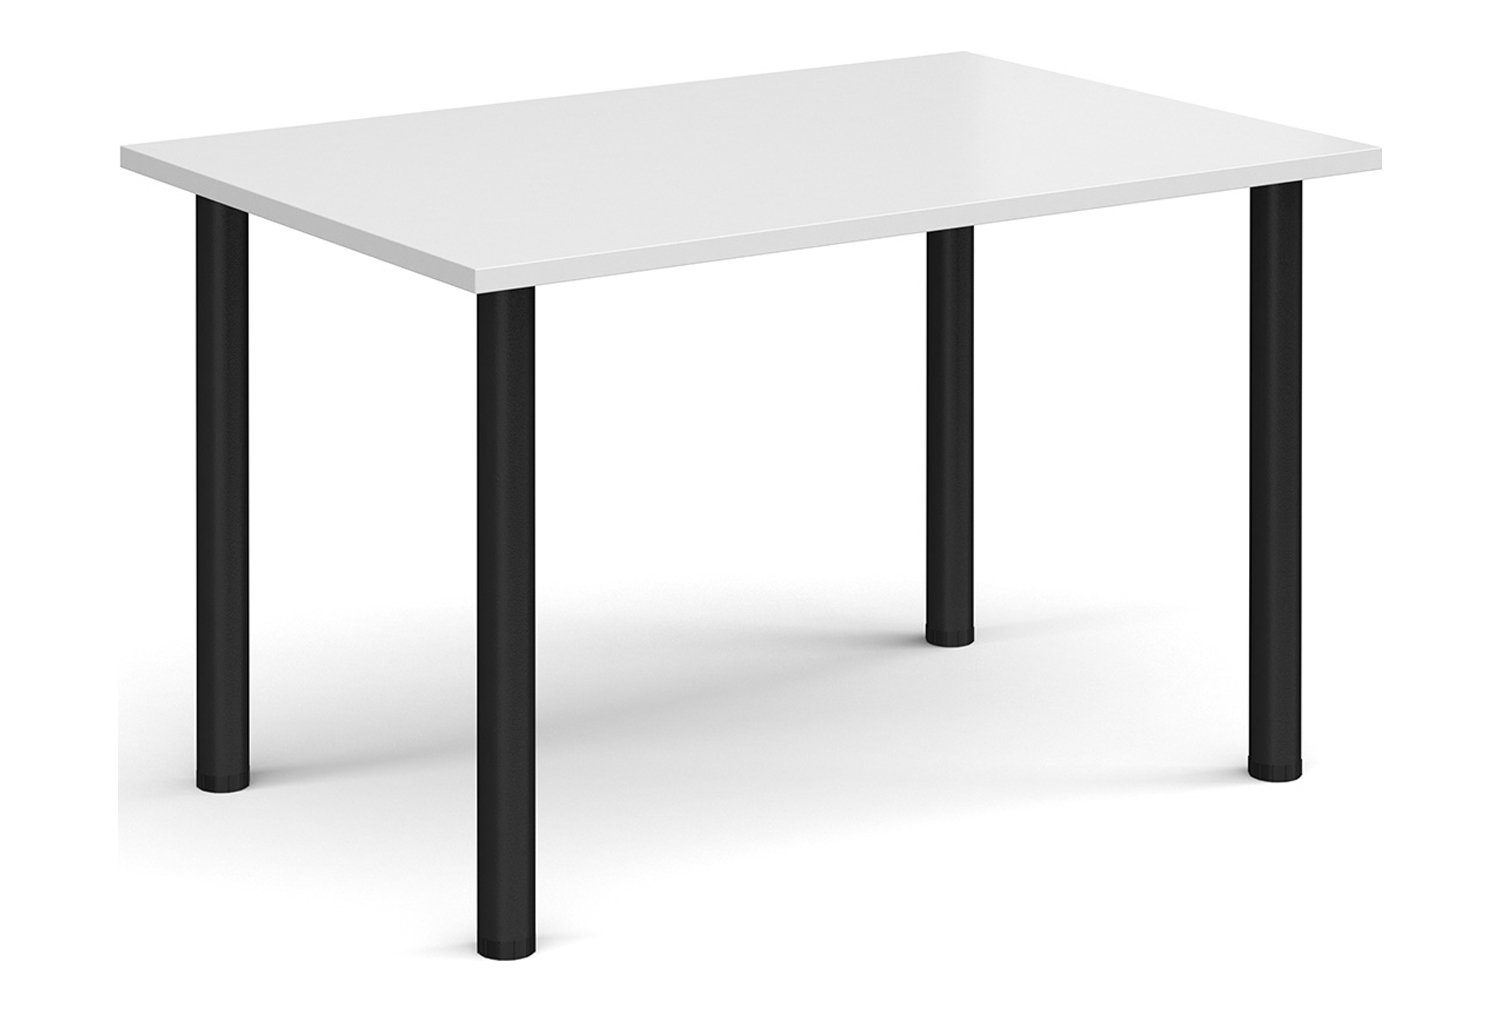 Pallas Rectangular Meeting Table, 120wx80dx73h (cm), Black Frame, White, Express Delivery